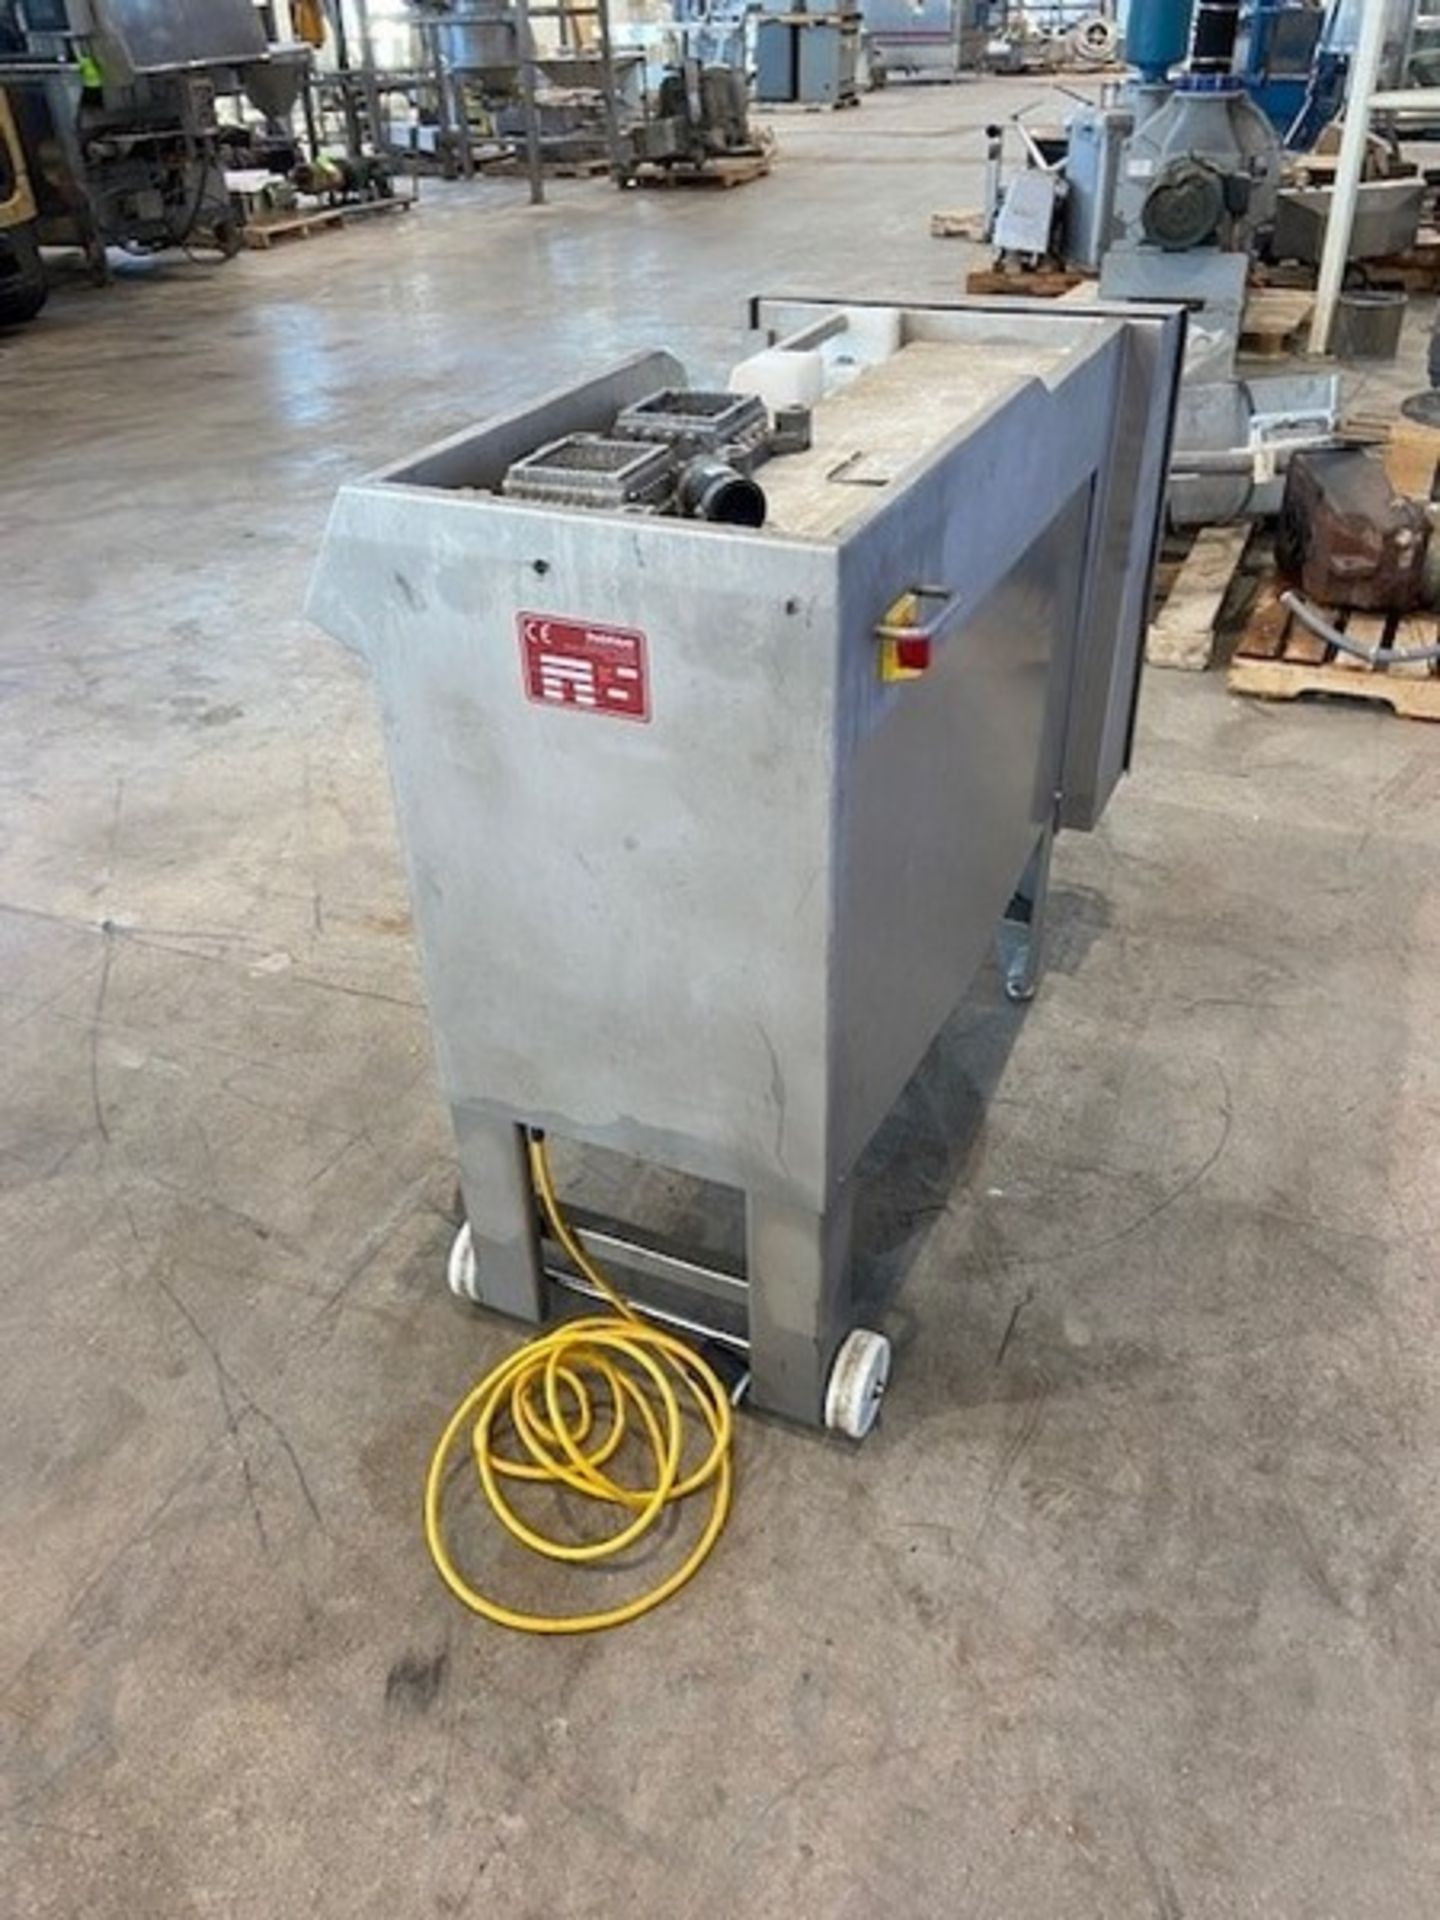 2013 Holac The Rounder, Type CUBIXX 100 L, S/N 003-48-41, 220 Volts, 3 Phase, with (2) Cutting - Image 3 of 8